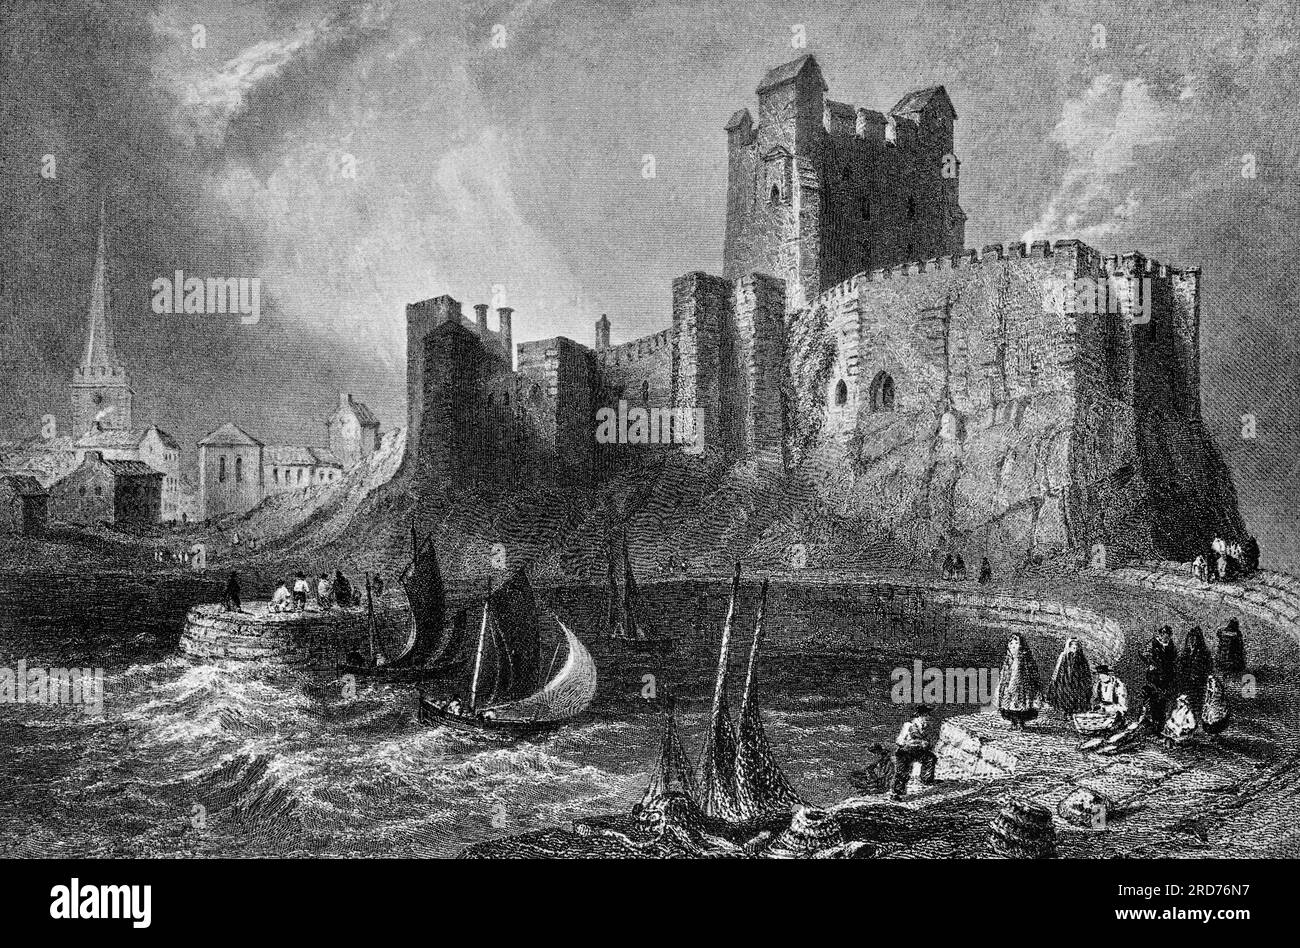 An early illustration of the Norman Carrickfergus Castle in County Antrim, on the northern shore of Belfast Lough, Northern Ireland. Built by John de Courcy in 1177 as his headquarters,  with 3/4 of the castle perimeter surrounded by water, it was besieged in turn by the Scottish, native Irish, English, and French and remains one of the best preserved medieval structures in Northern Ireland. Stock Photo